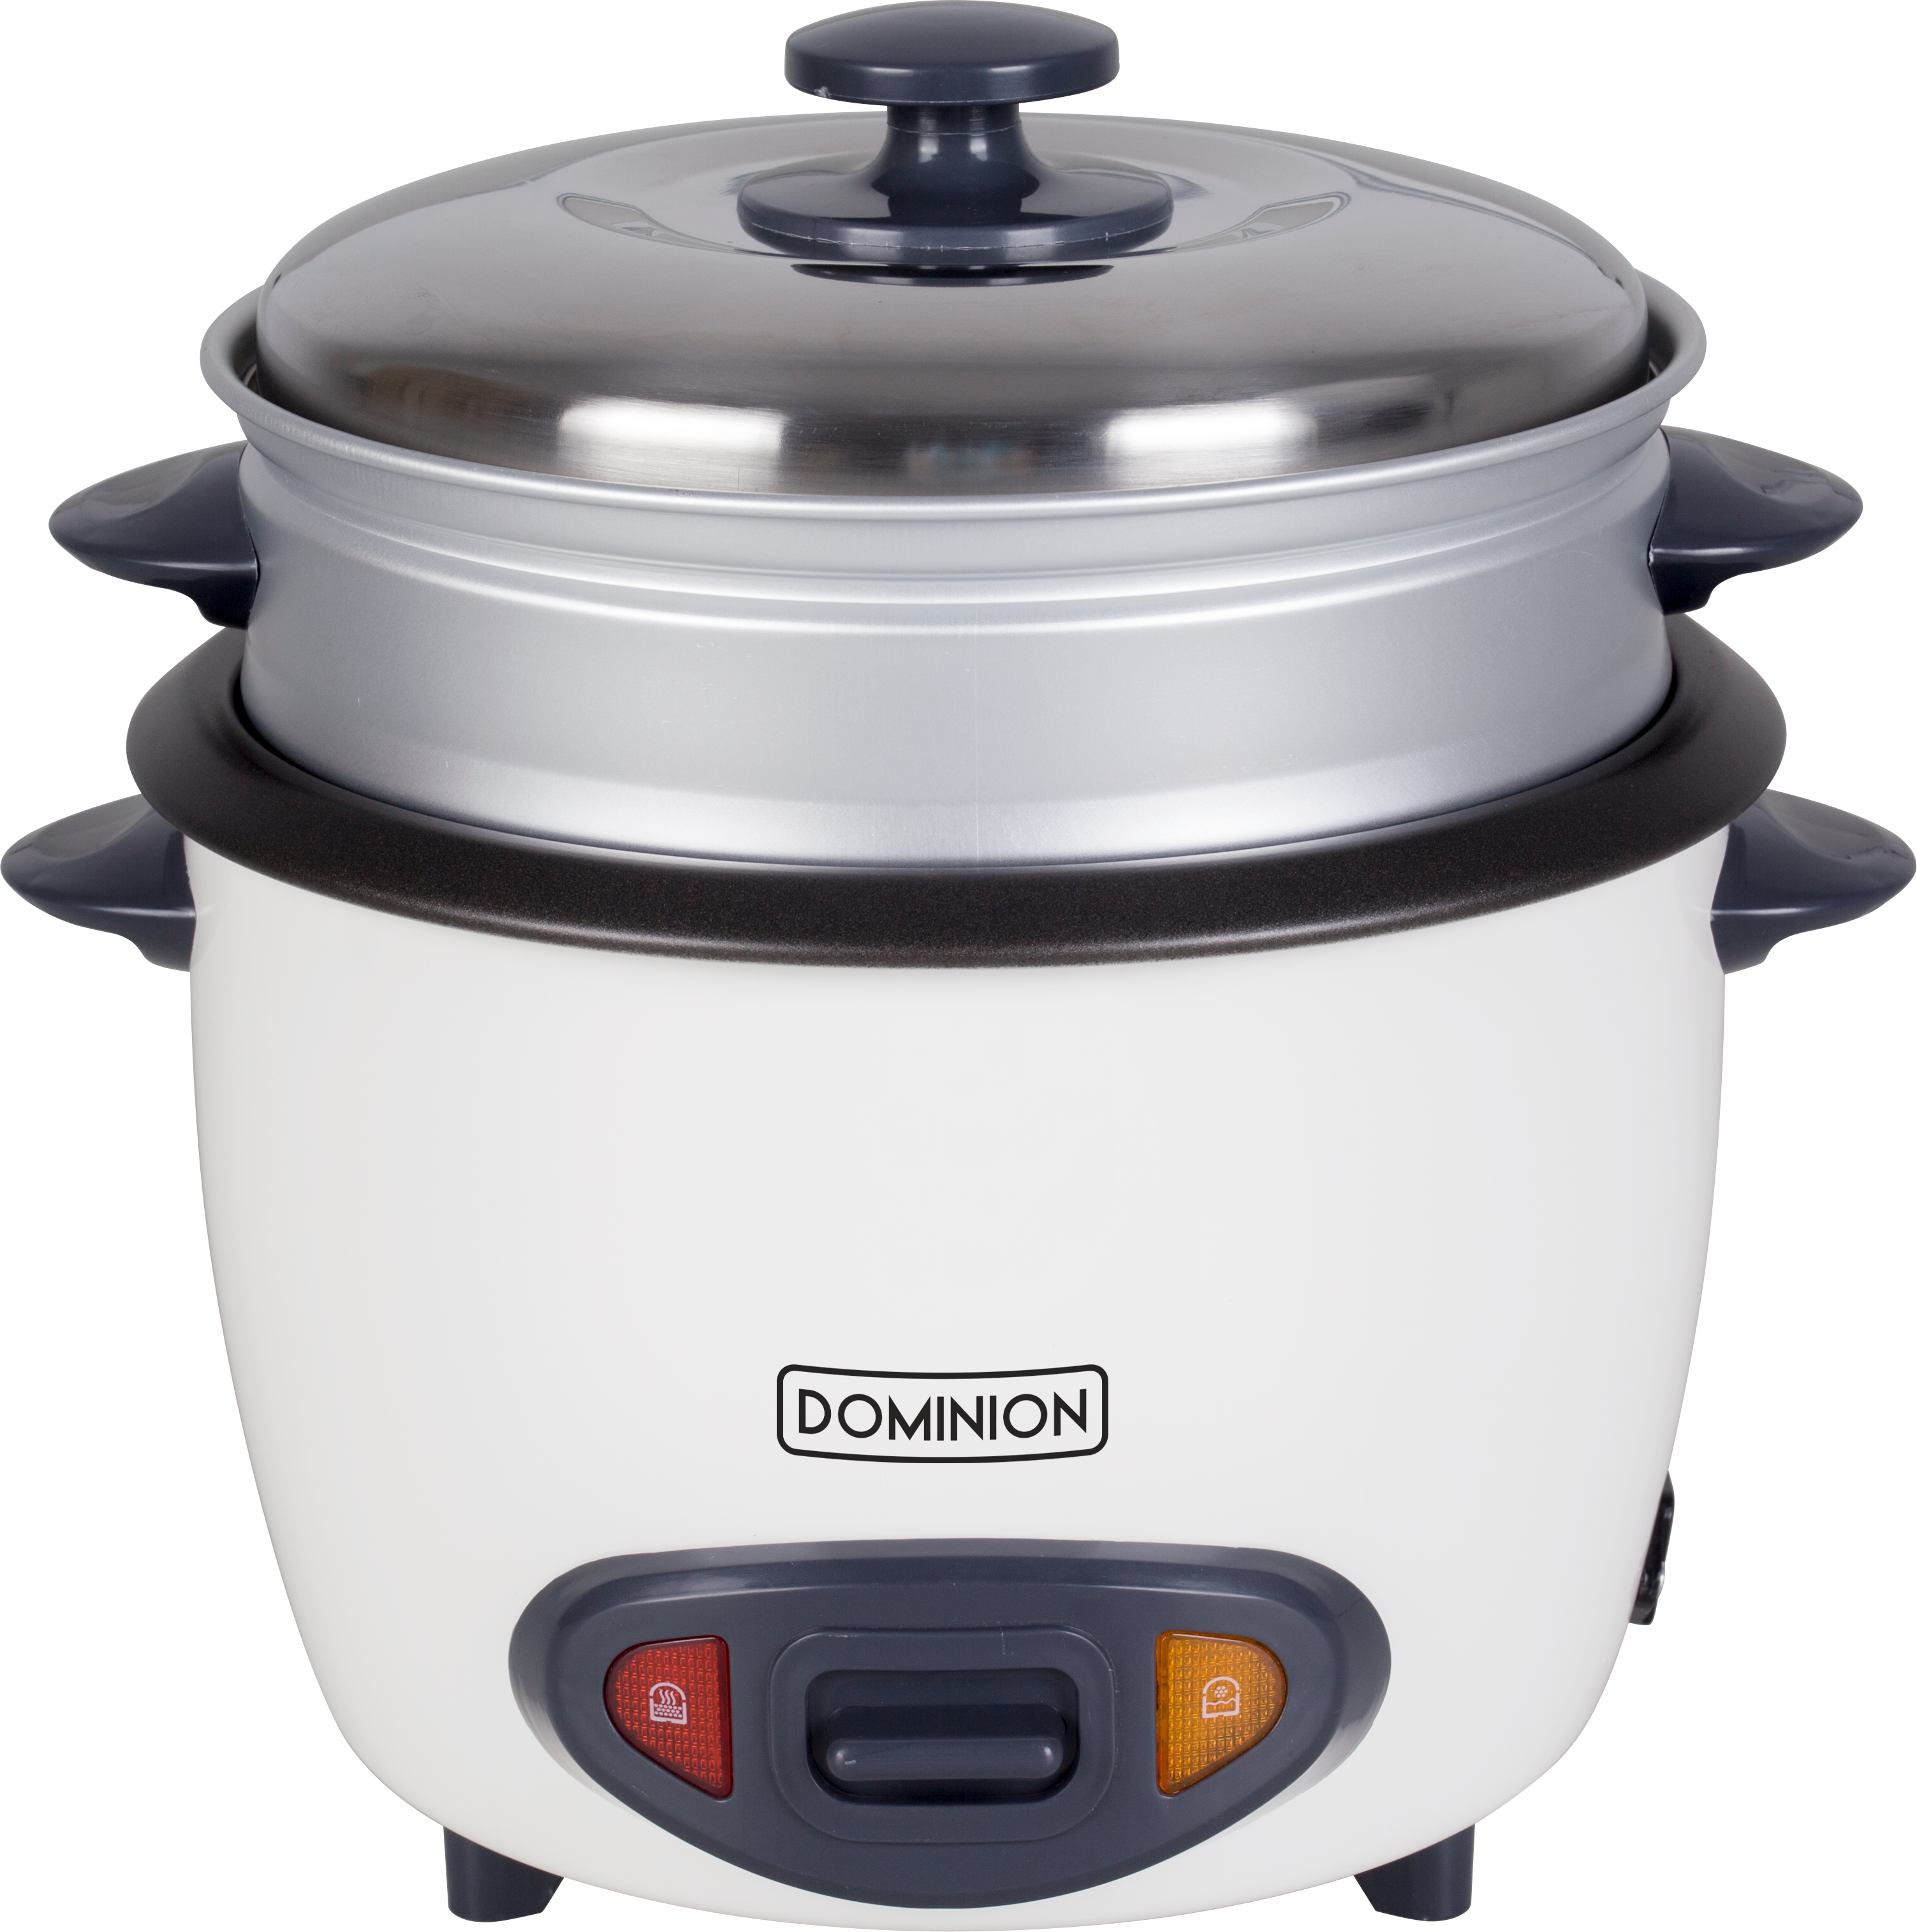 3/6 Cup Rice Cooker and Steamer – DOMINION